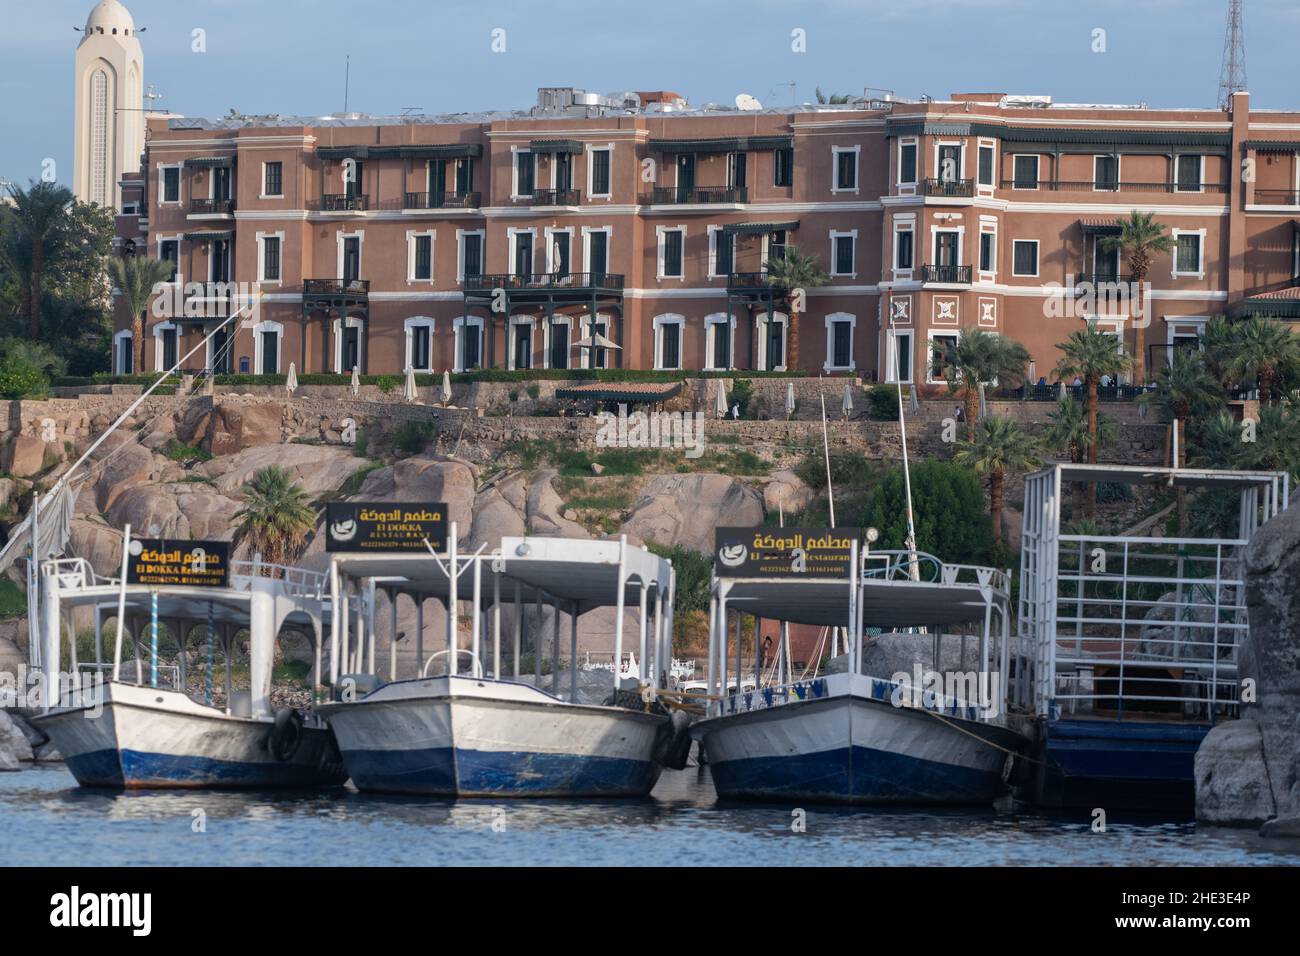 The Sofitel Legend Old Cataract Hotel on the Nile river in Aswan, Egypt. Agatha Christie's novel death on the Nile was partially set in this hotel. Stock Photo